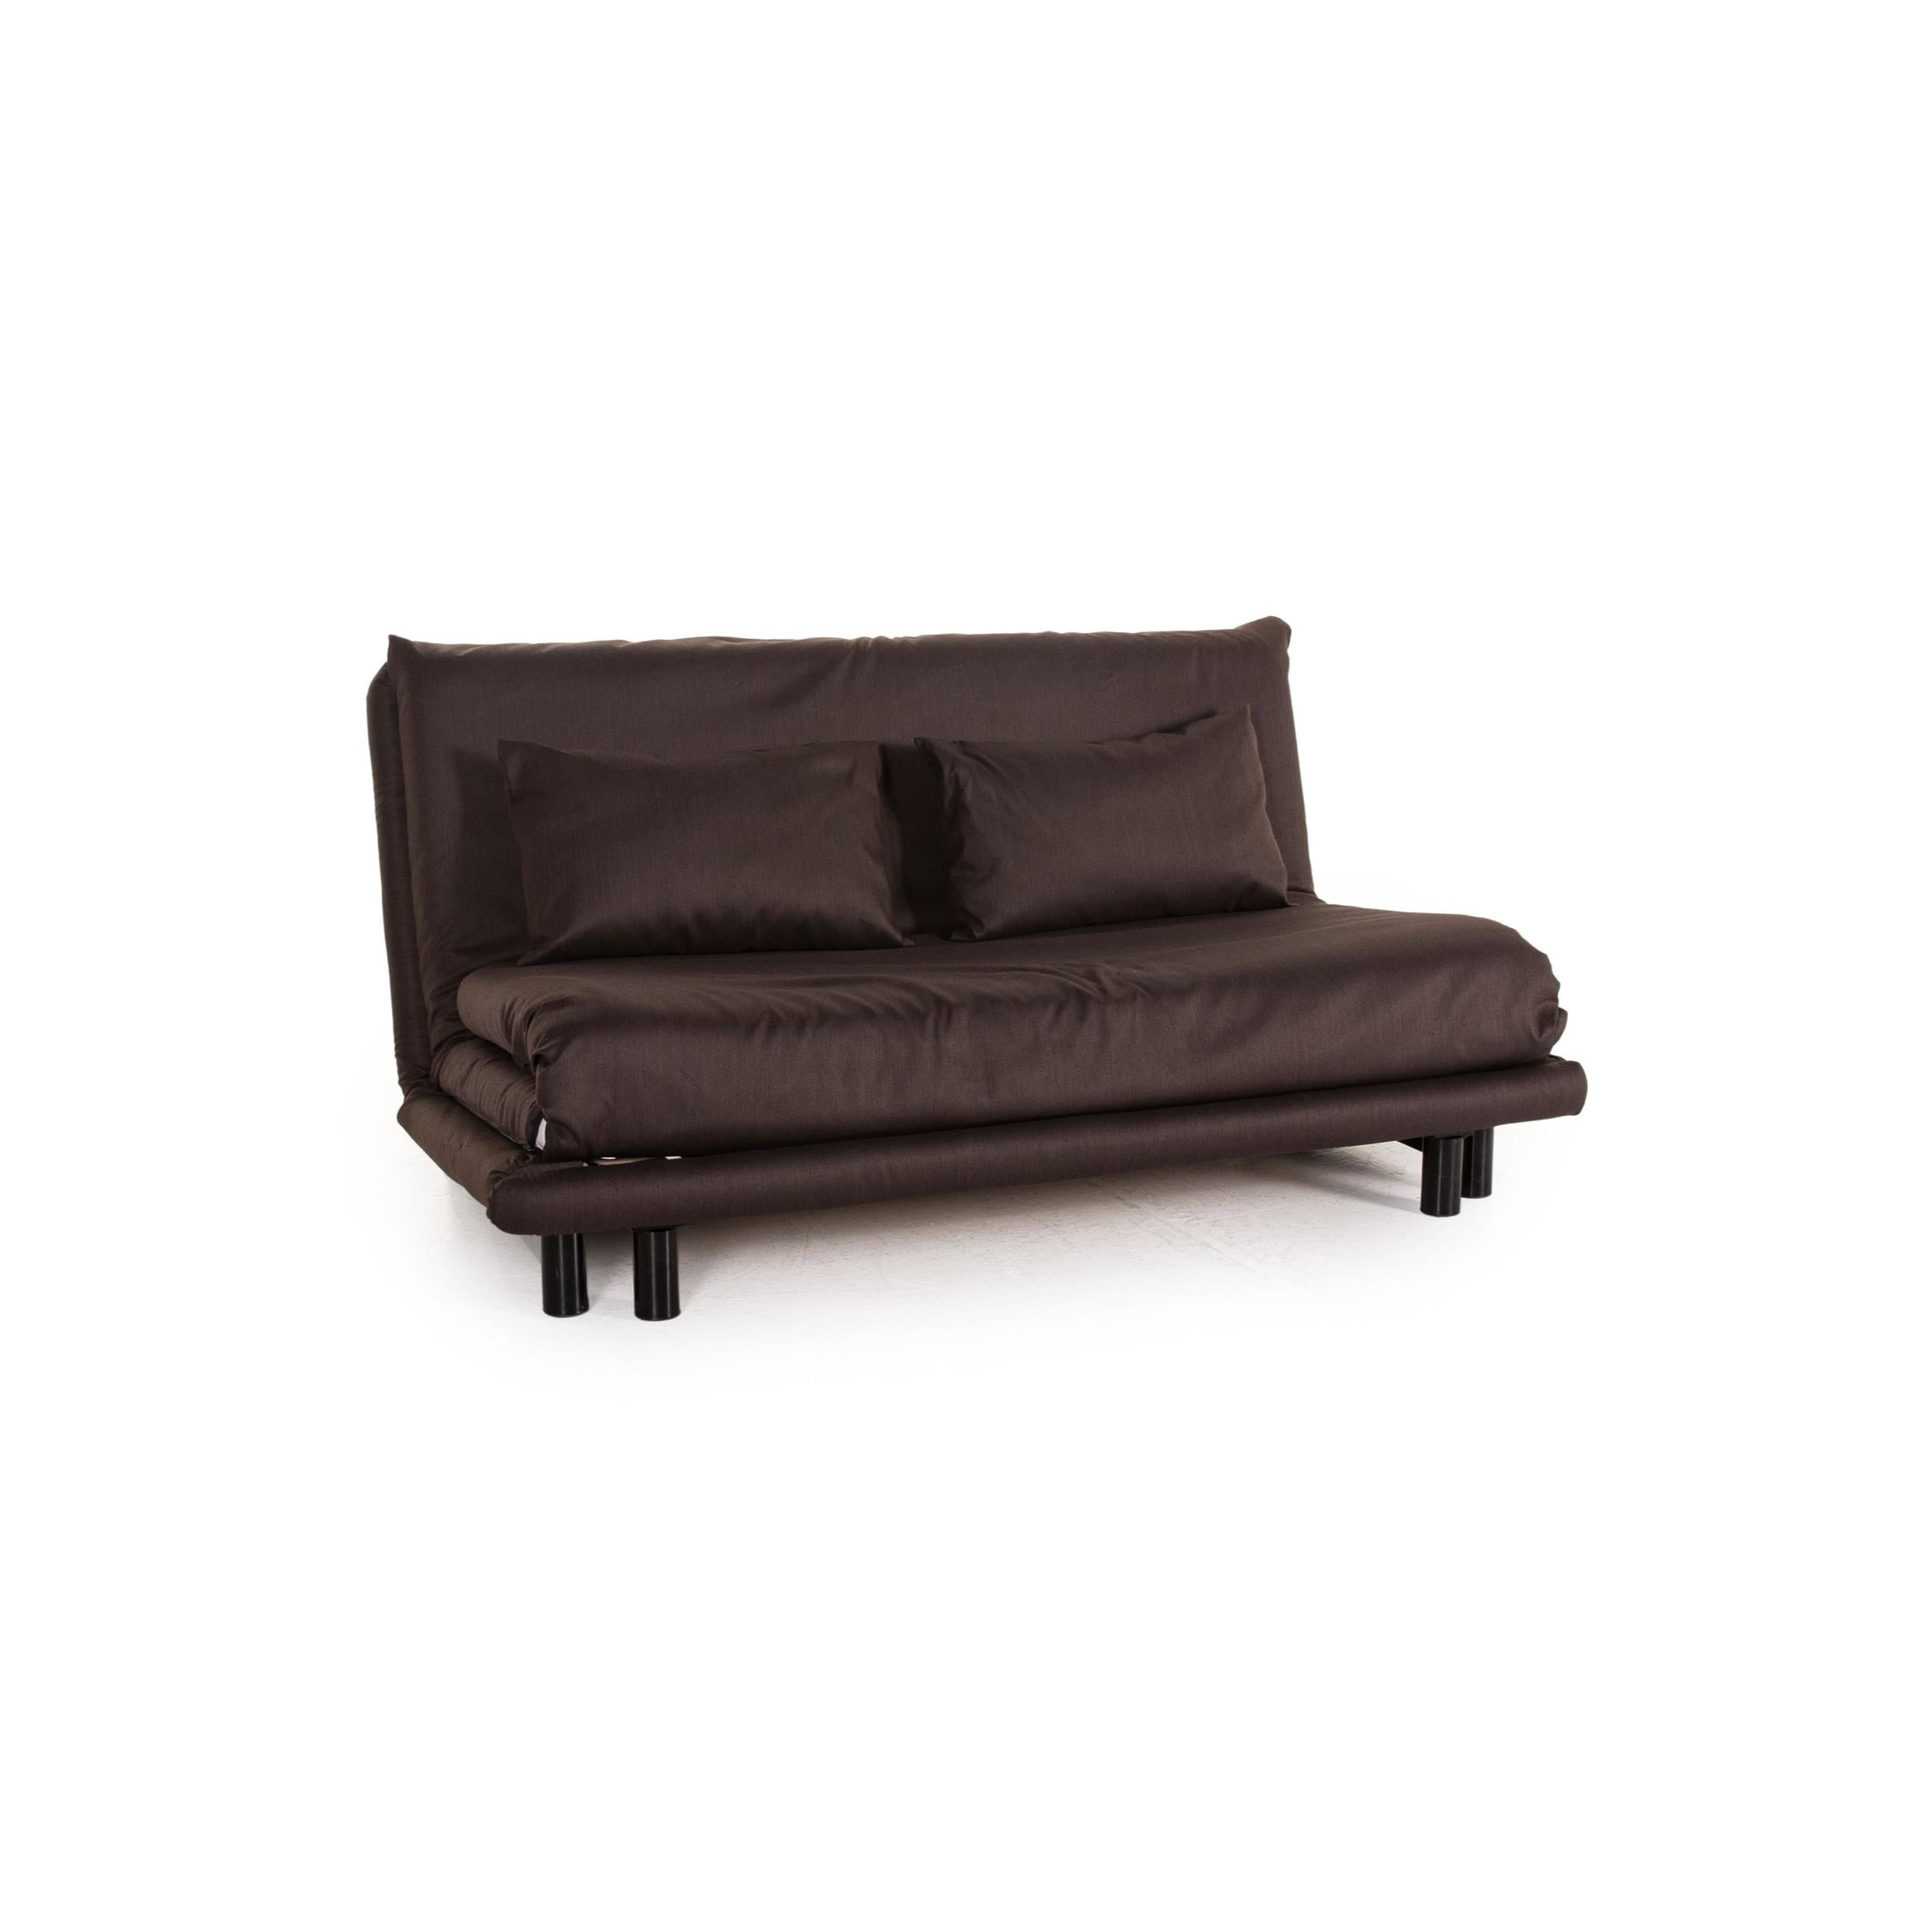 Ligne Roset Multy Fabric Sofa Brown Three-Seater Function Sleeping Function In Fair Condition For Sale In Cologne, DE